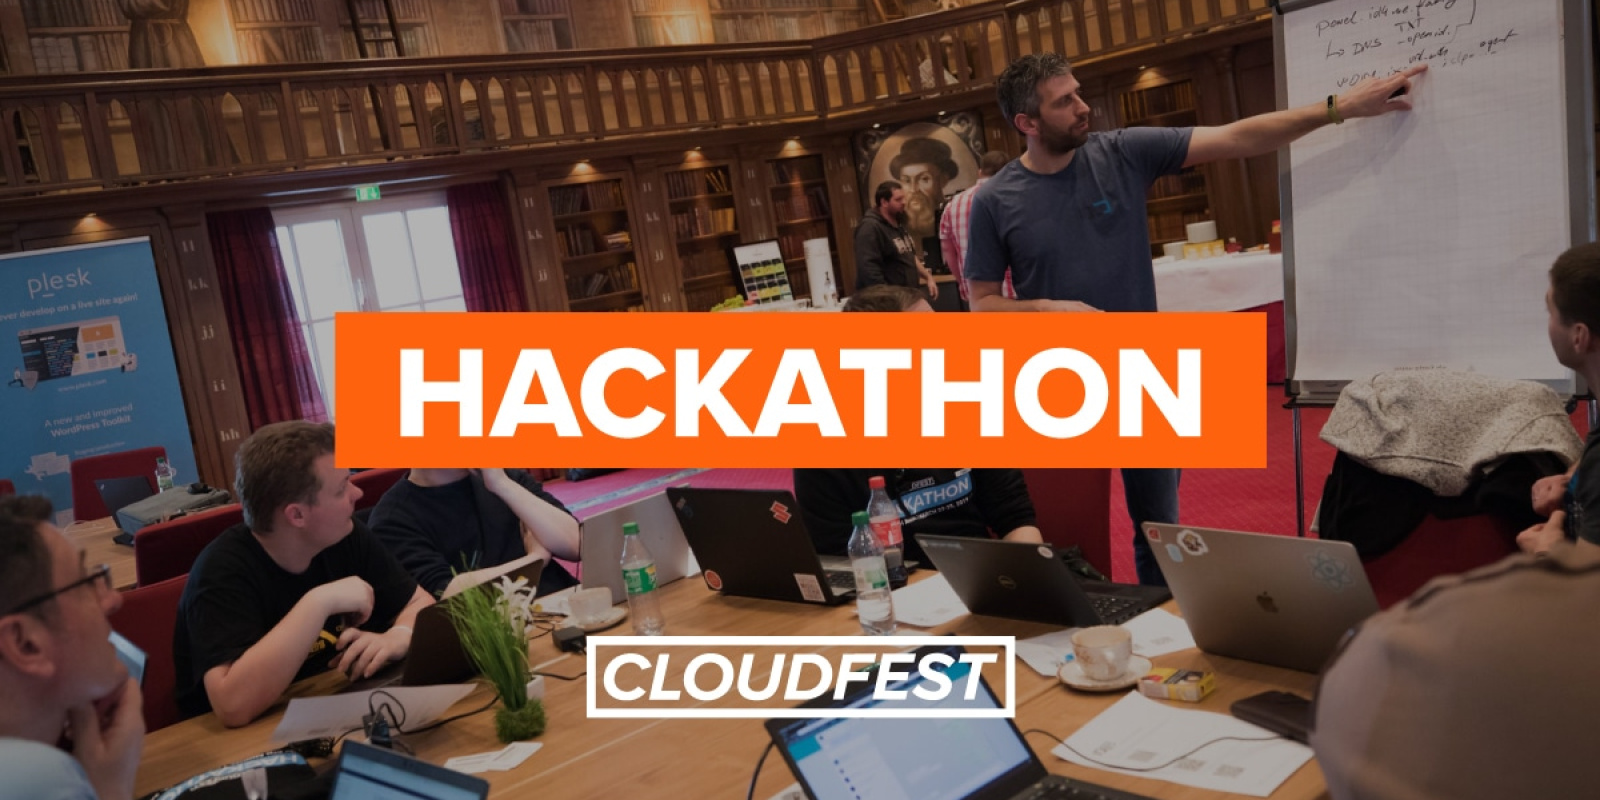 Photo of attendees in a vintage library room, on man is pointing at a flip chart. Overlay wording: Hackathon CloudFest